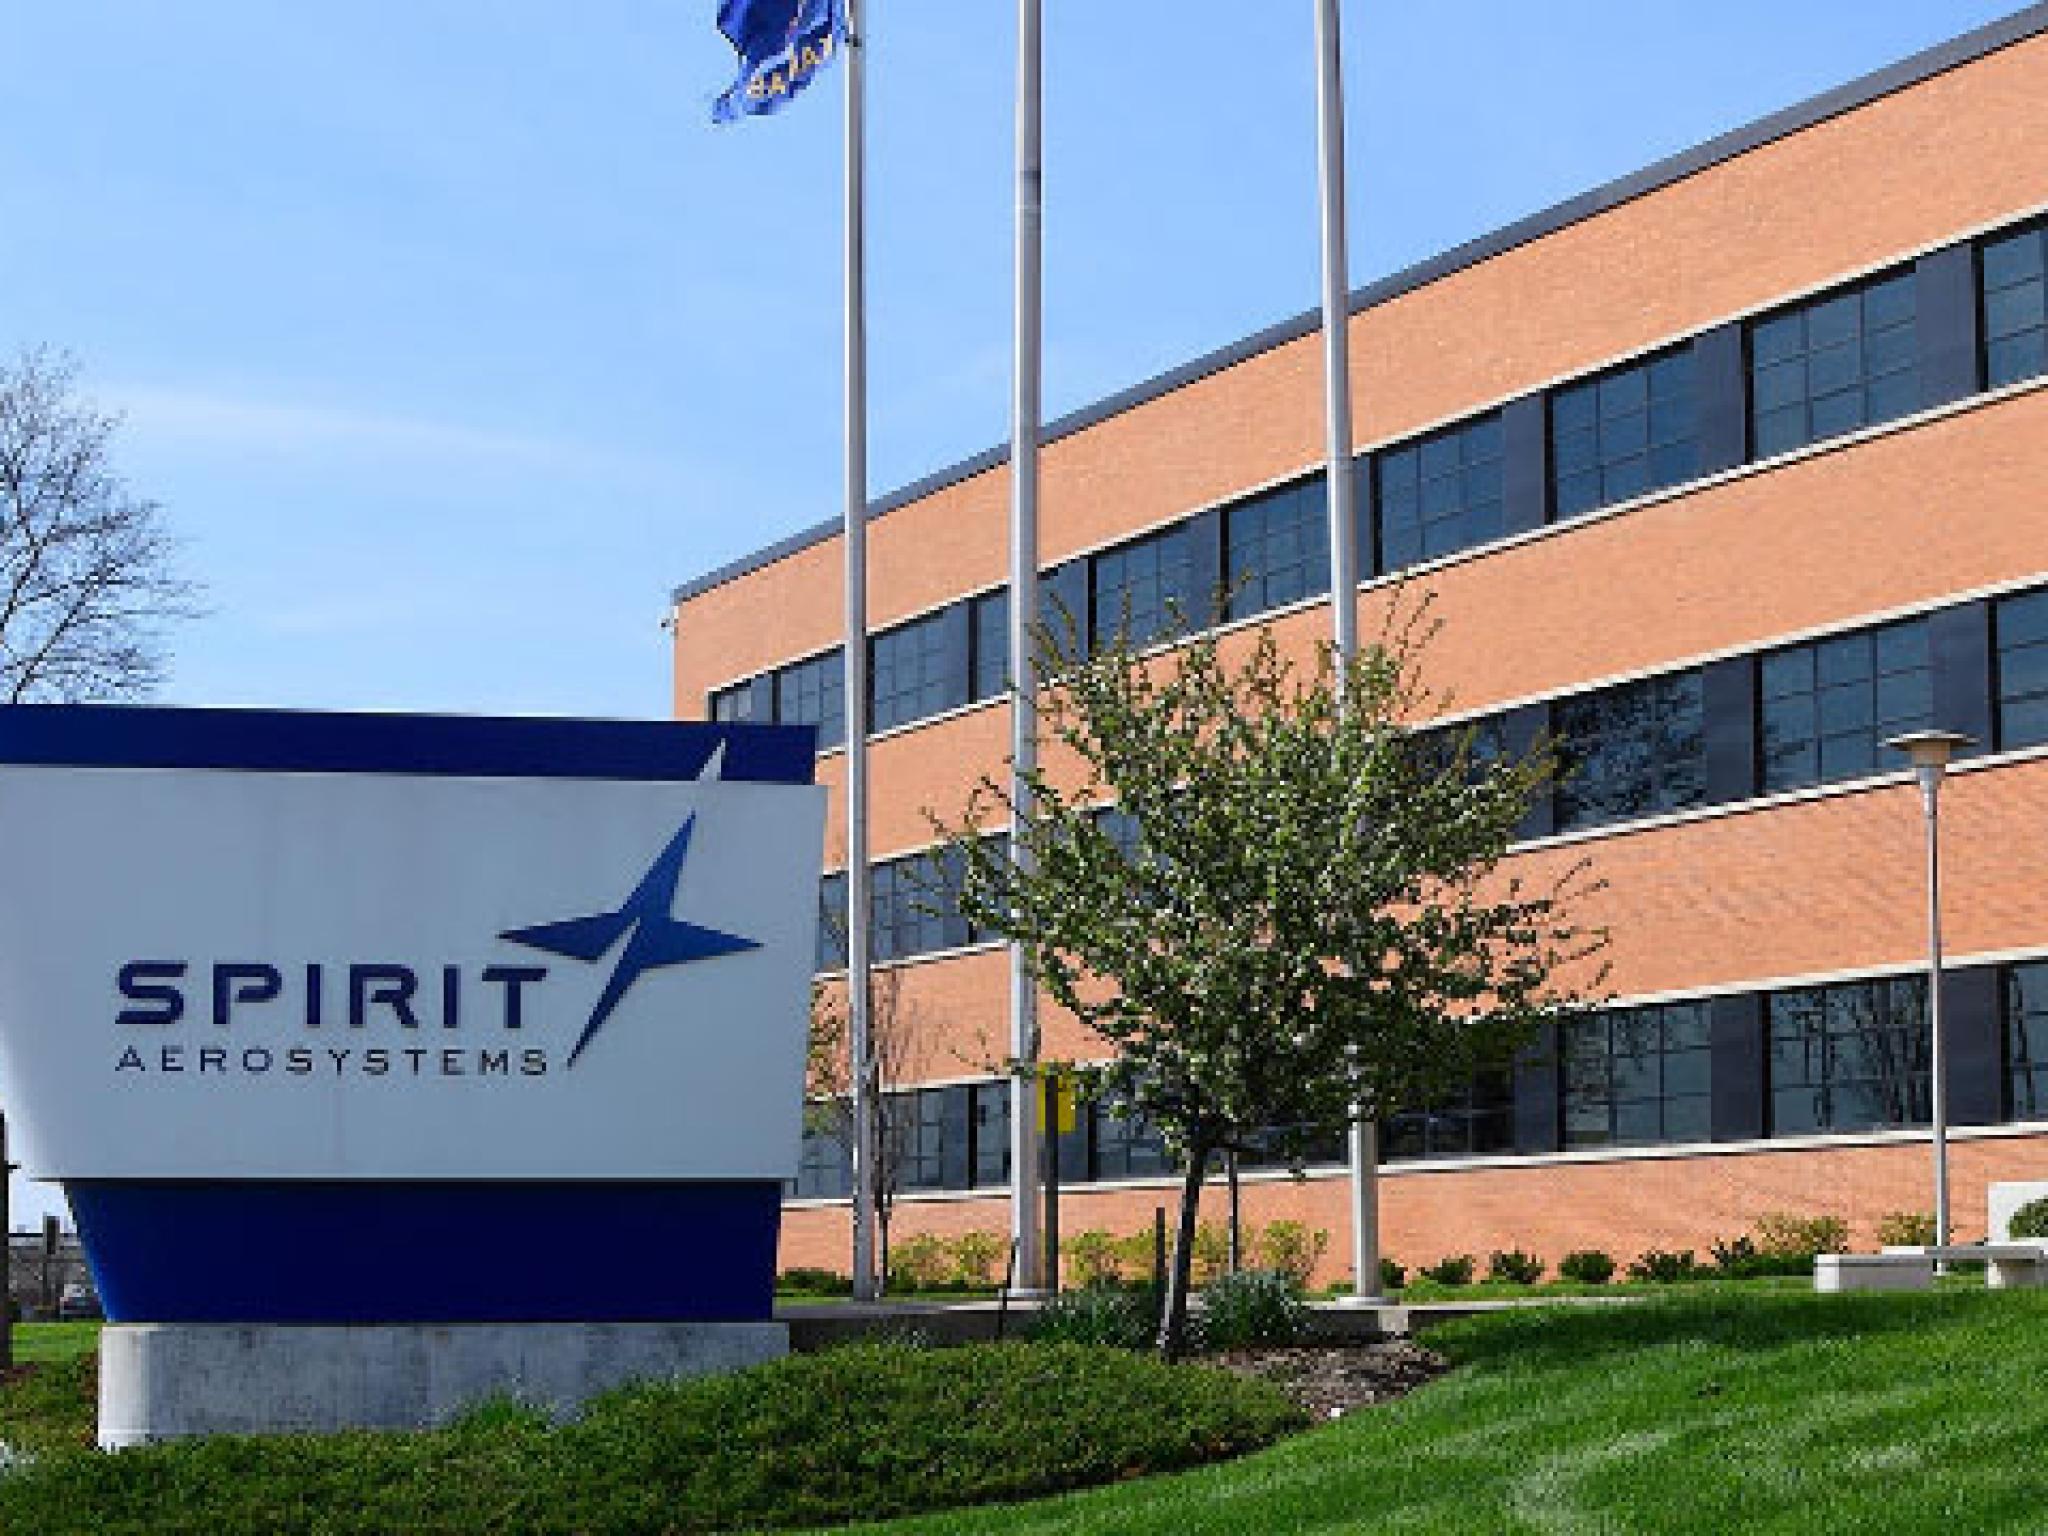  spirit-aerosystems-to-lay-off-hundreds-as-boeing-struggles-with-production 